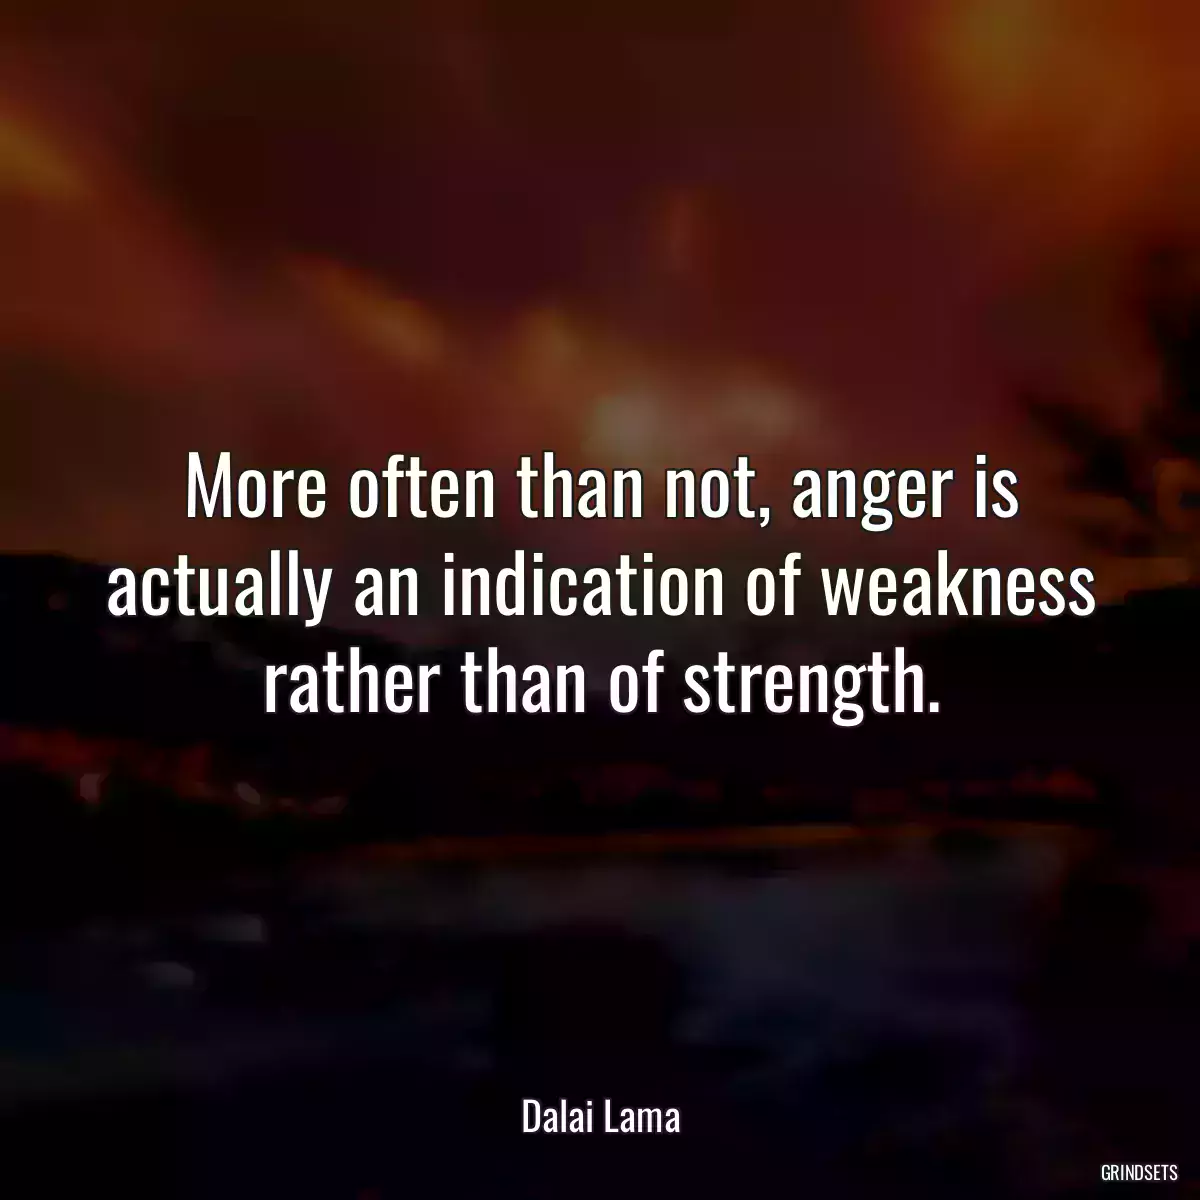 More often than not, anger is actually an indication of weakness rather than of strength.